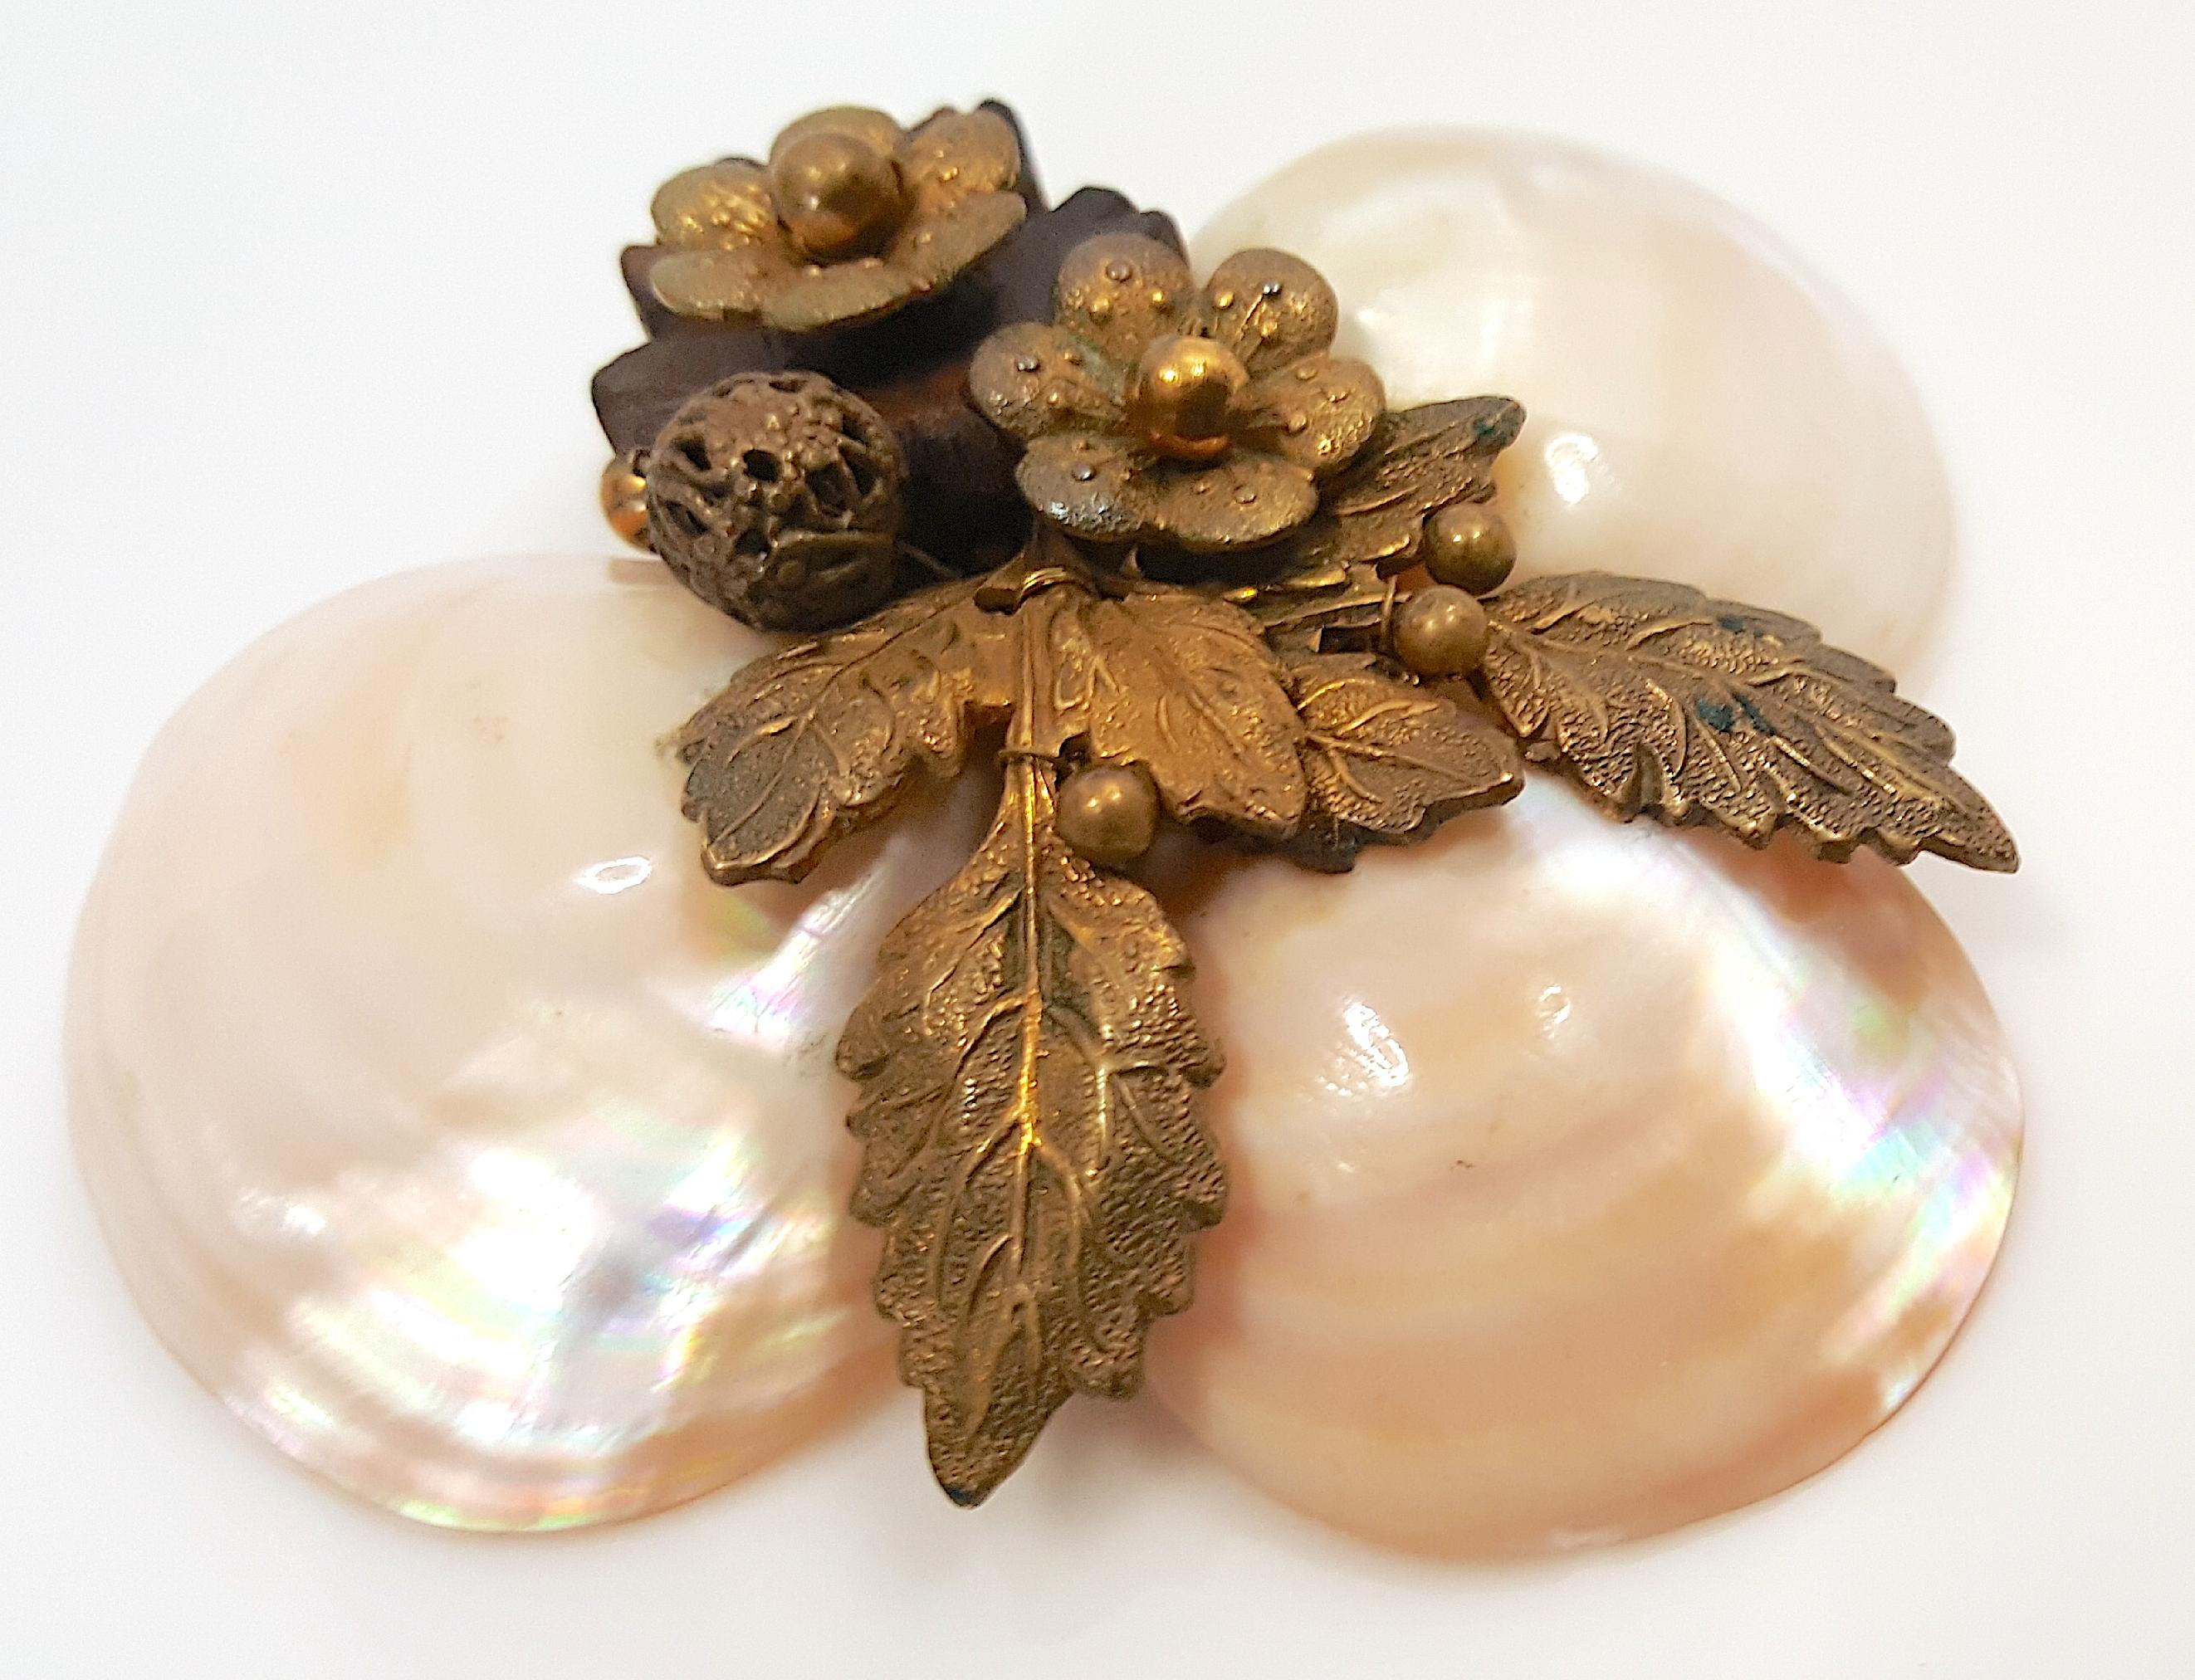 This early Miriam Haskell lacquered-shell and brass-decorated clip brooch was created by Frank Hess, her first designer since 1926. The 1930s brooch features three seashells supporting an asymmetrical arrangement of textural Russian-gold gilt